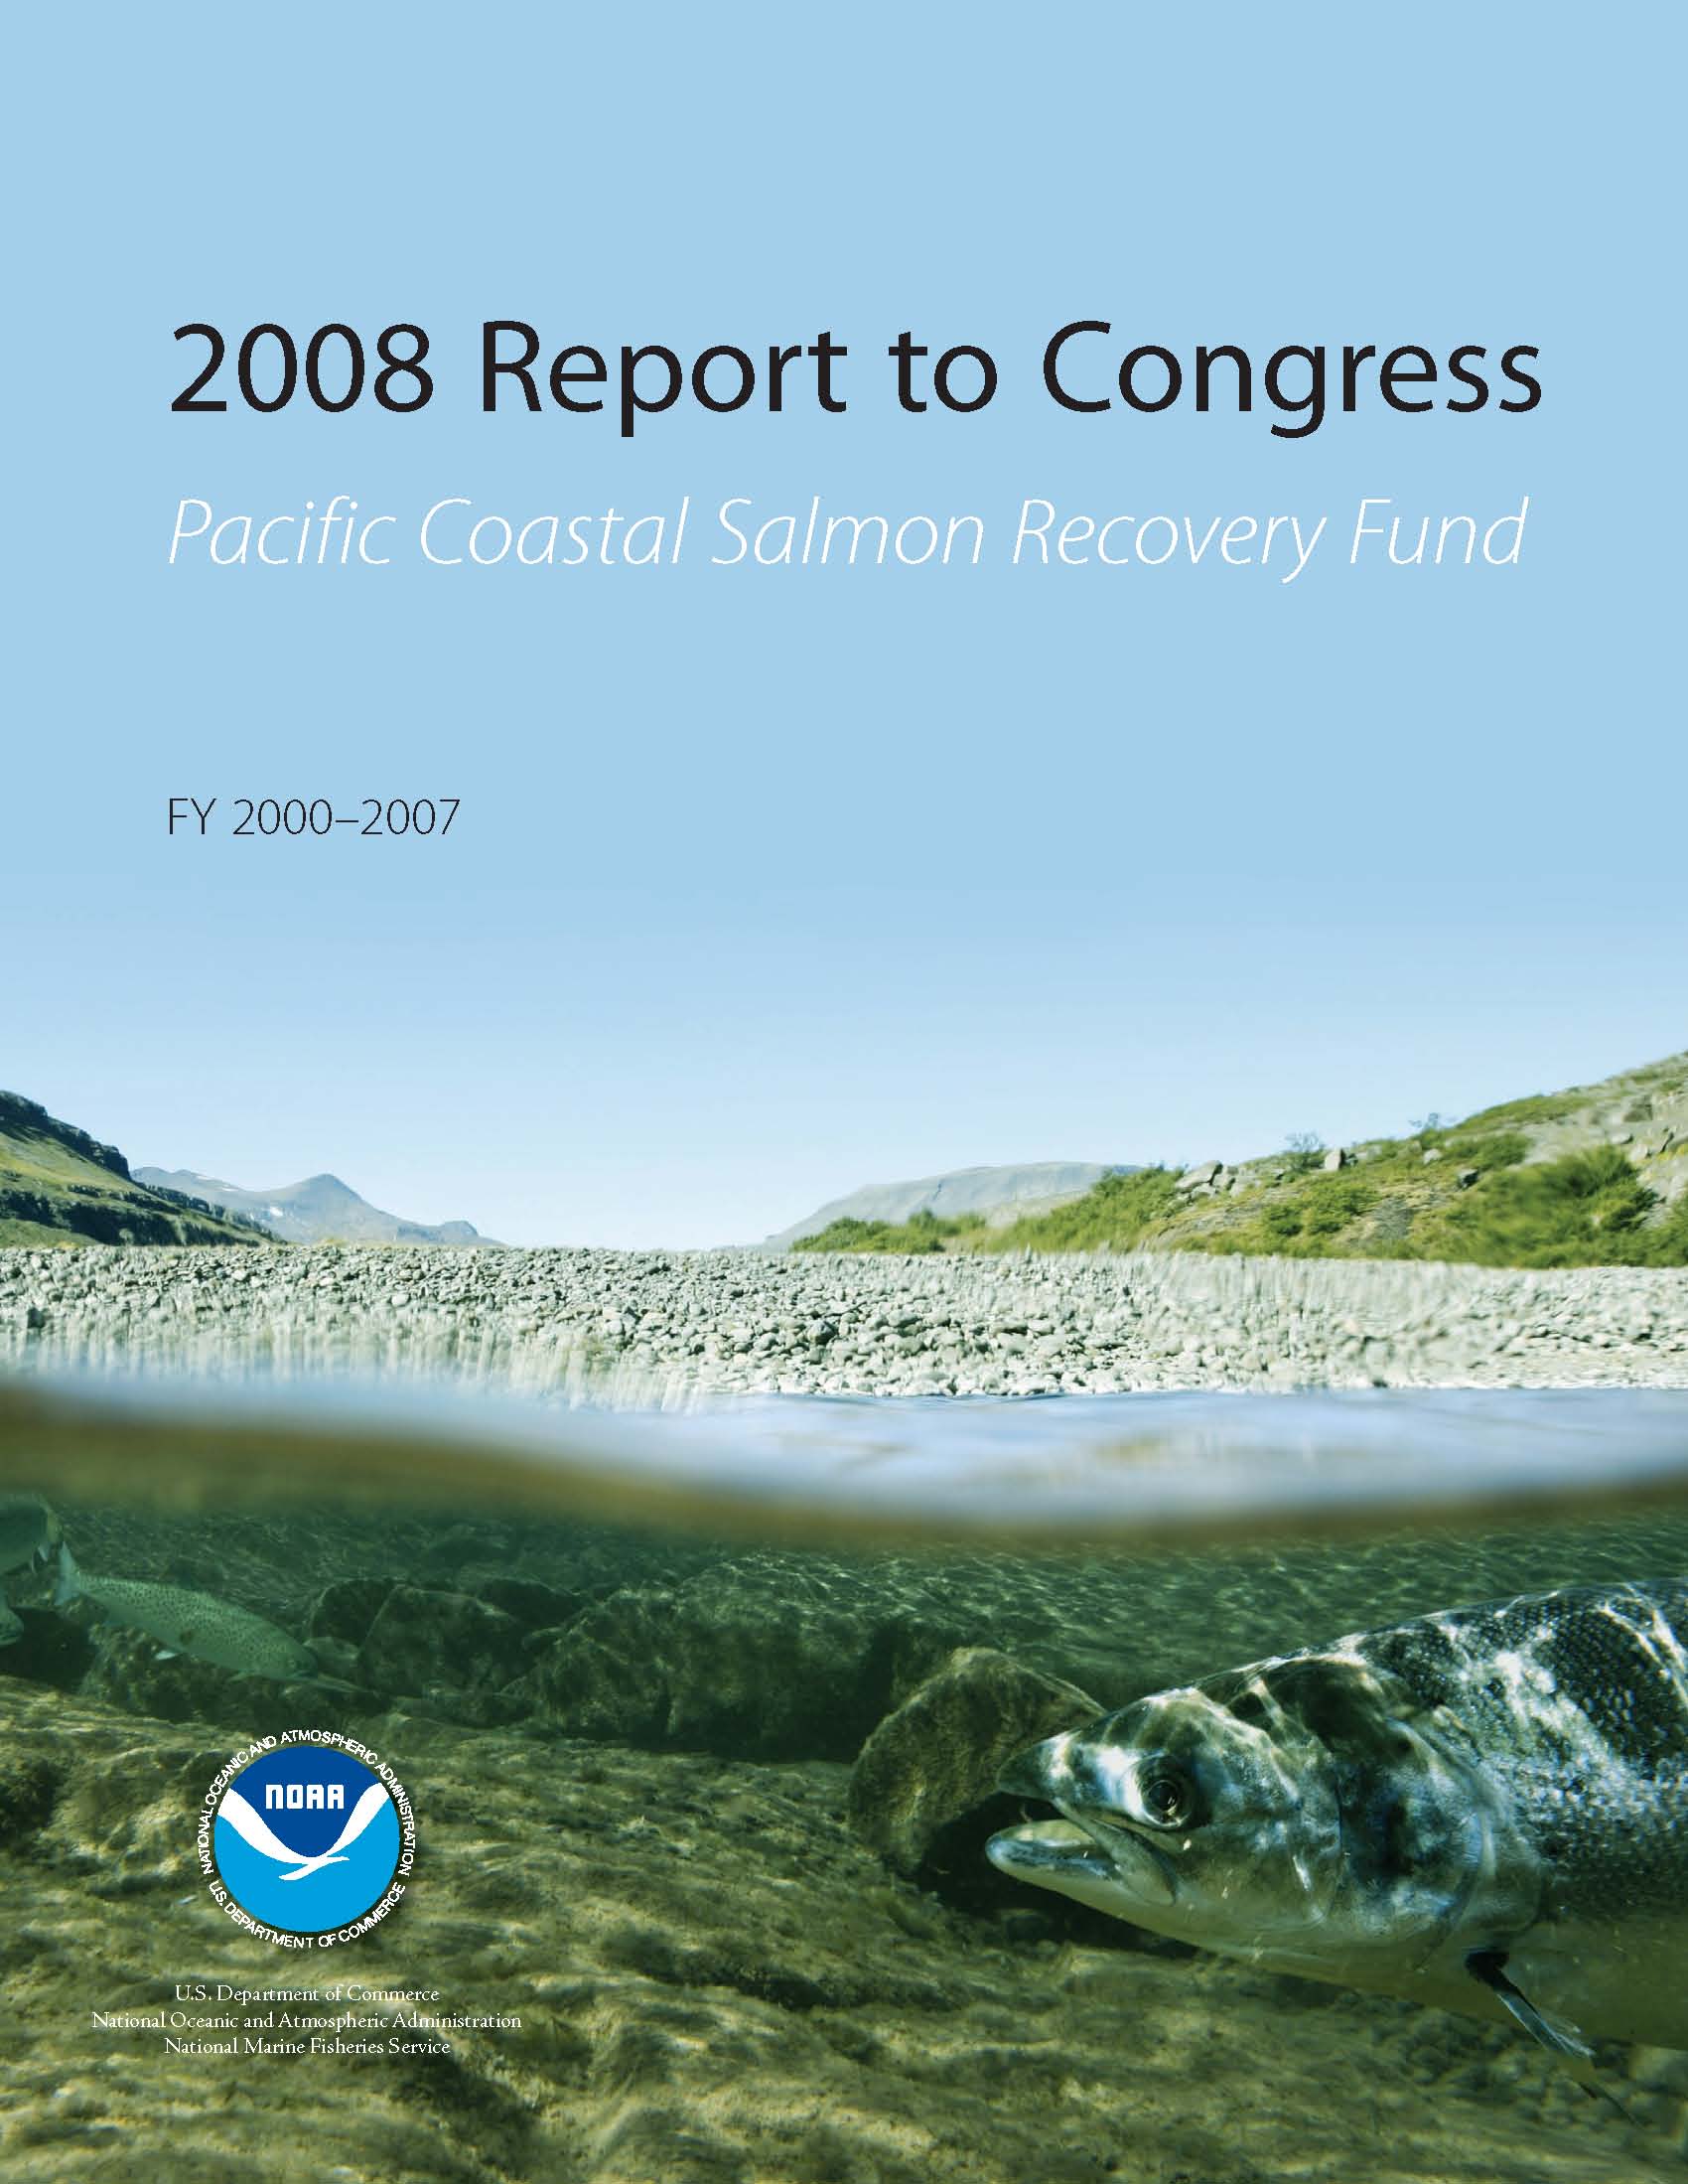 Pacific Coastal Salmon Recovery Fund 2008 Report to Congress